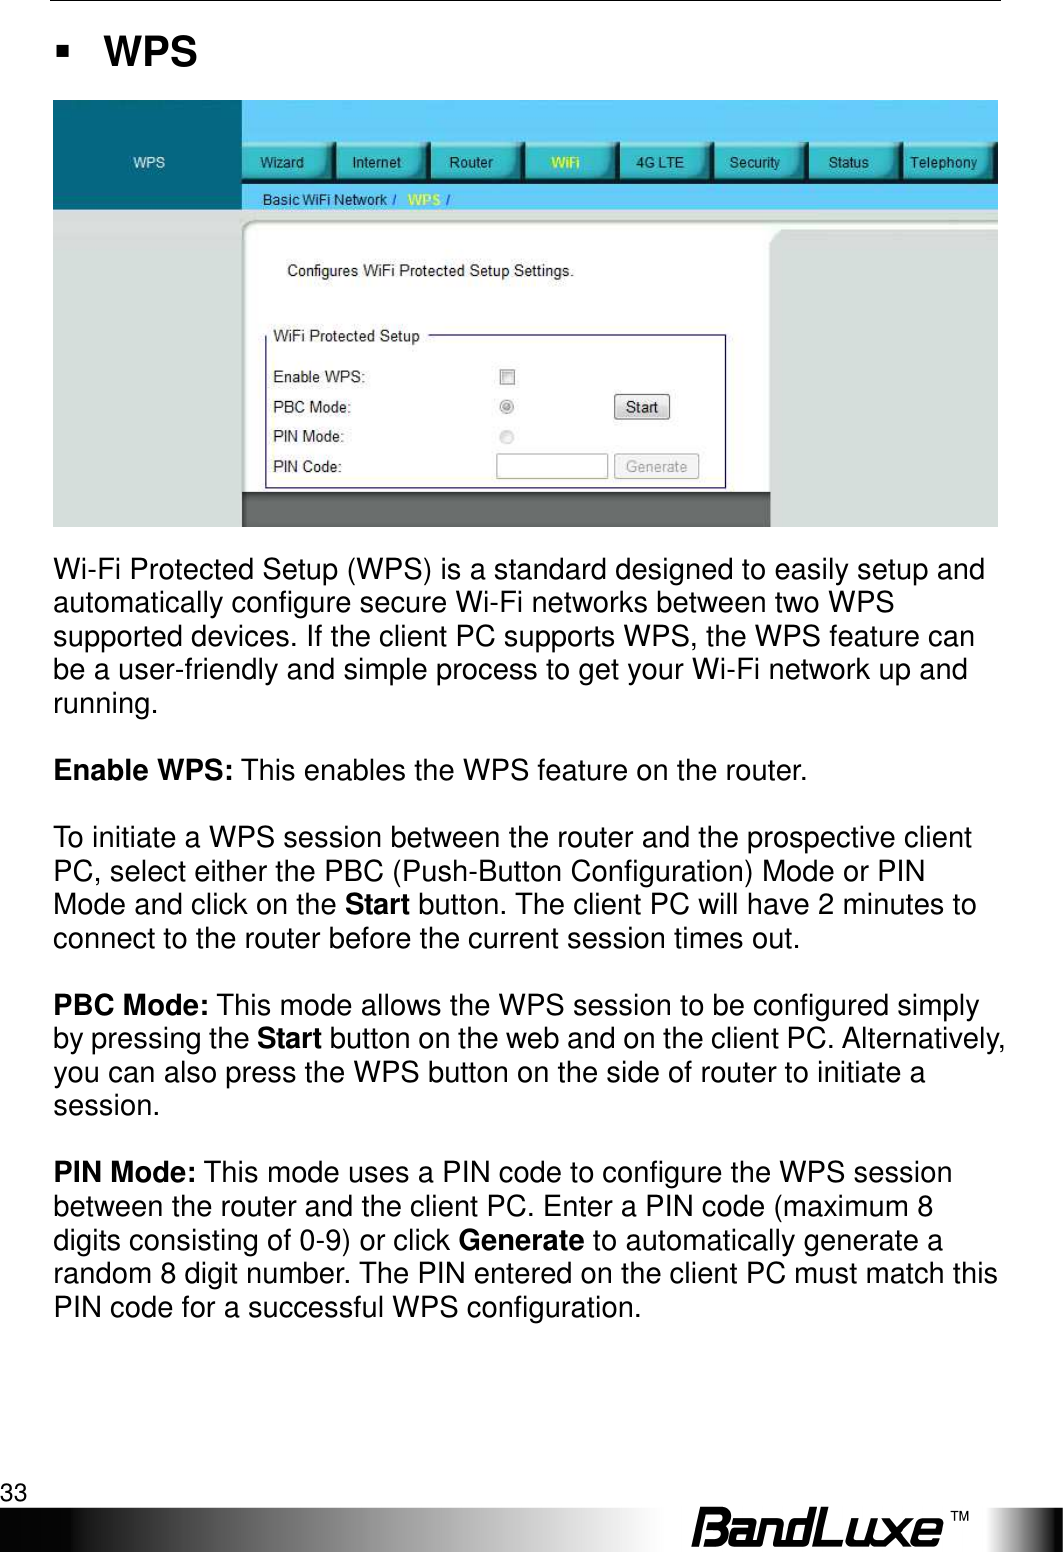   WiFi Setup 33  WPS  Wi-Fi Protected Setup (WPS) is a standard designed to easily setup and automatically configure secure Wi-Fi networks between two WPS supported devices. If the client PC supports WPS, the WPS feature can be a user-friendly and simple process to get your Wi-Fi network up and running.  Enable WPS: This enables the WPS feature on the router.  To initiate a WPS session between the router and the prospective client PC, select either the PBC (Push-Button Configuration) Mode or PIN Mode and click on the Start button. The client PC will have 2 minutes to connect to the router before the current session times out.  PBC Mode: This mode allows the WPS session to be configured simply by pressing the Start button on the web and on the client PC. Alternatively, you can also press the WPS button on the side of router to initiate a session.  PIN Mode: This mode uses a PIN code to configure the WPS session between the router and the client PC. Enter a PIN code (maximum 8 digits consisting of 0-9) or click Generate to automatically generate a random 8 digit number. The PIN entered on the client PC must match this PIN code for a successful WPS configuration. 